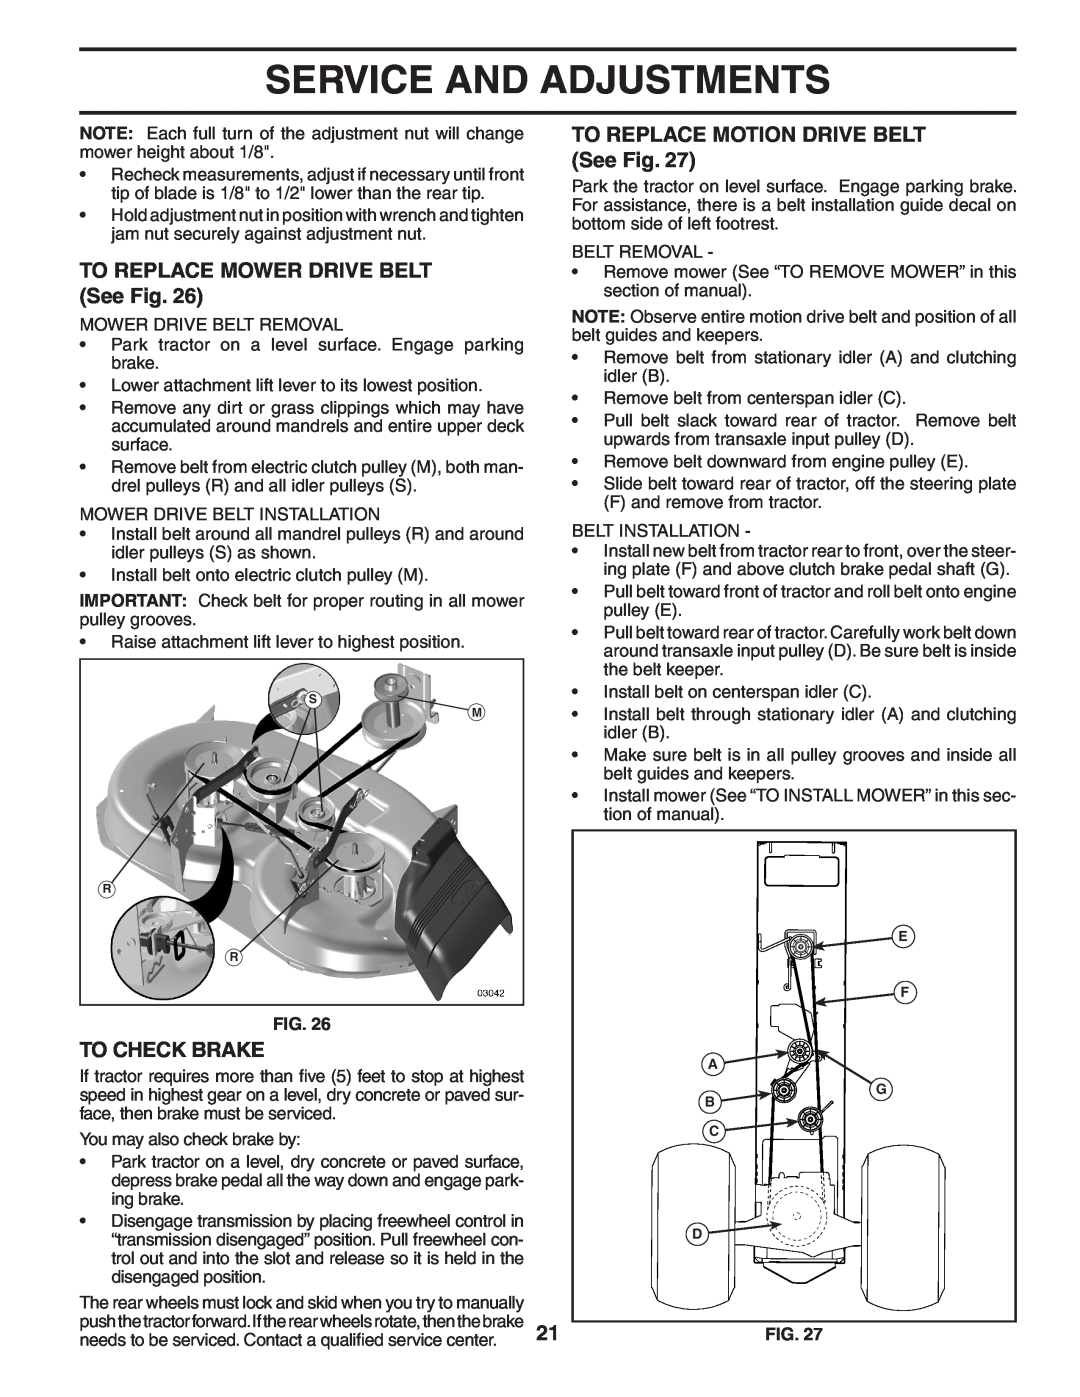 Poulan 402993 manual TO REPLACE MOWER DRIVE BELT See Fig, To Check Brake, TO REPLACE MOTION DRIVE BELT See Fig 